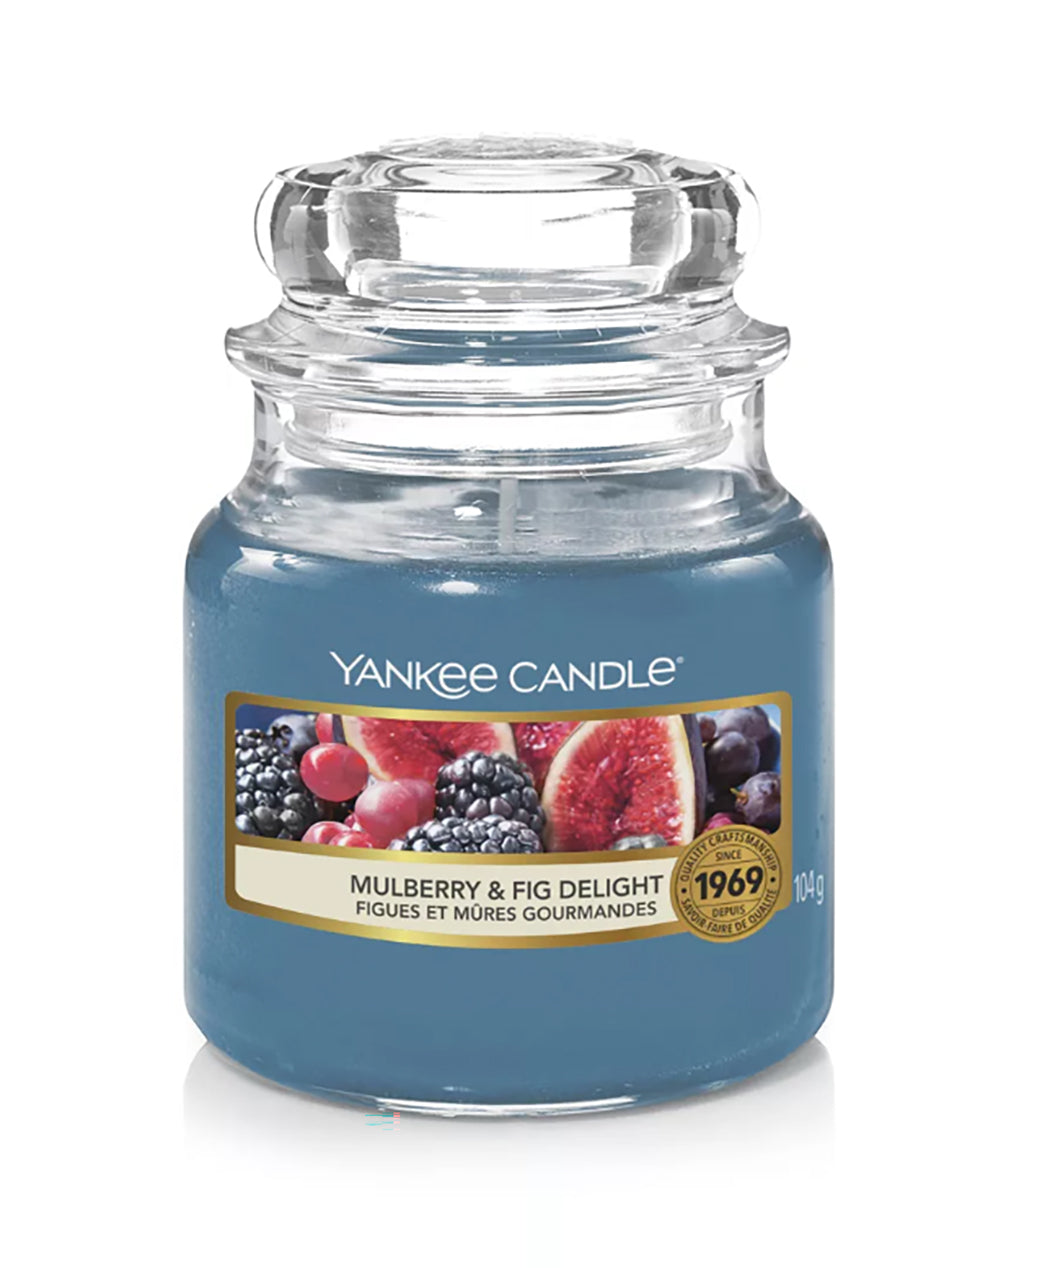 Yankee Candle Mulberry & Fig Delight Small Jar Candle